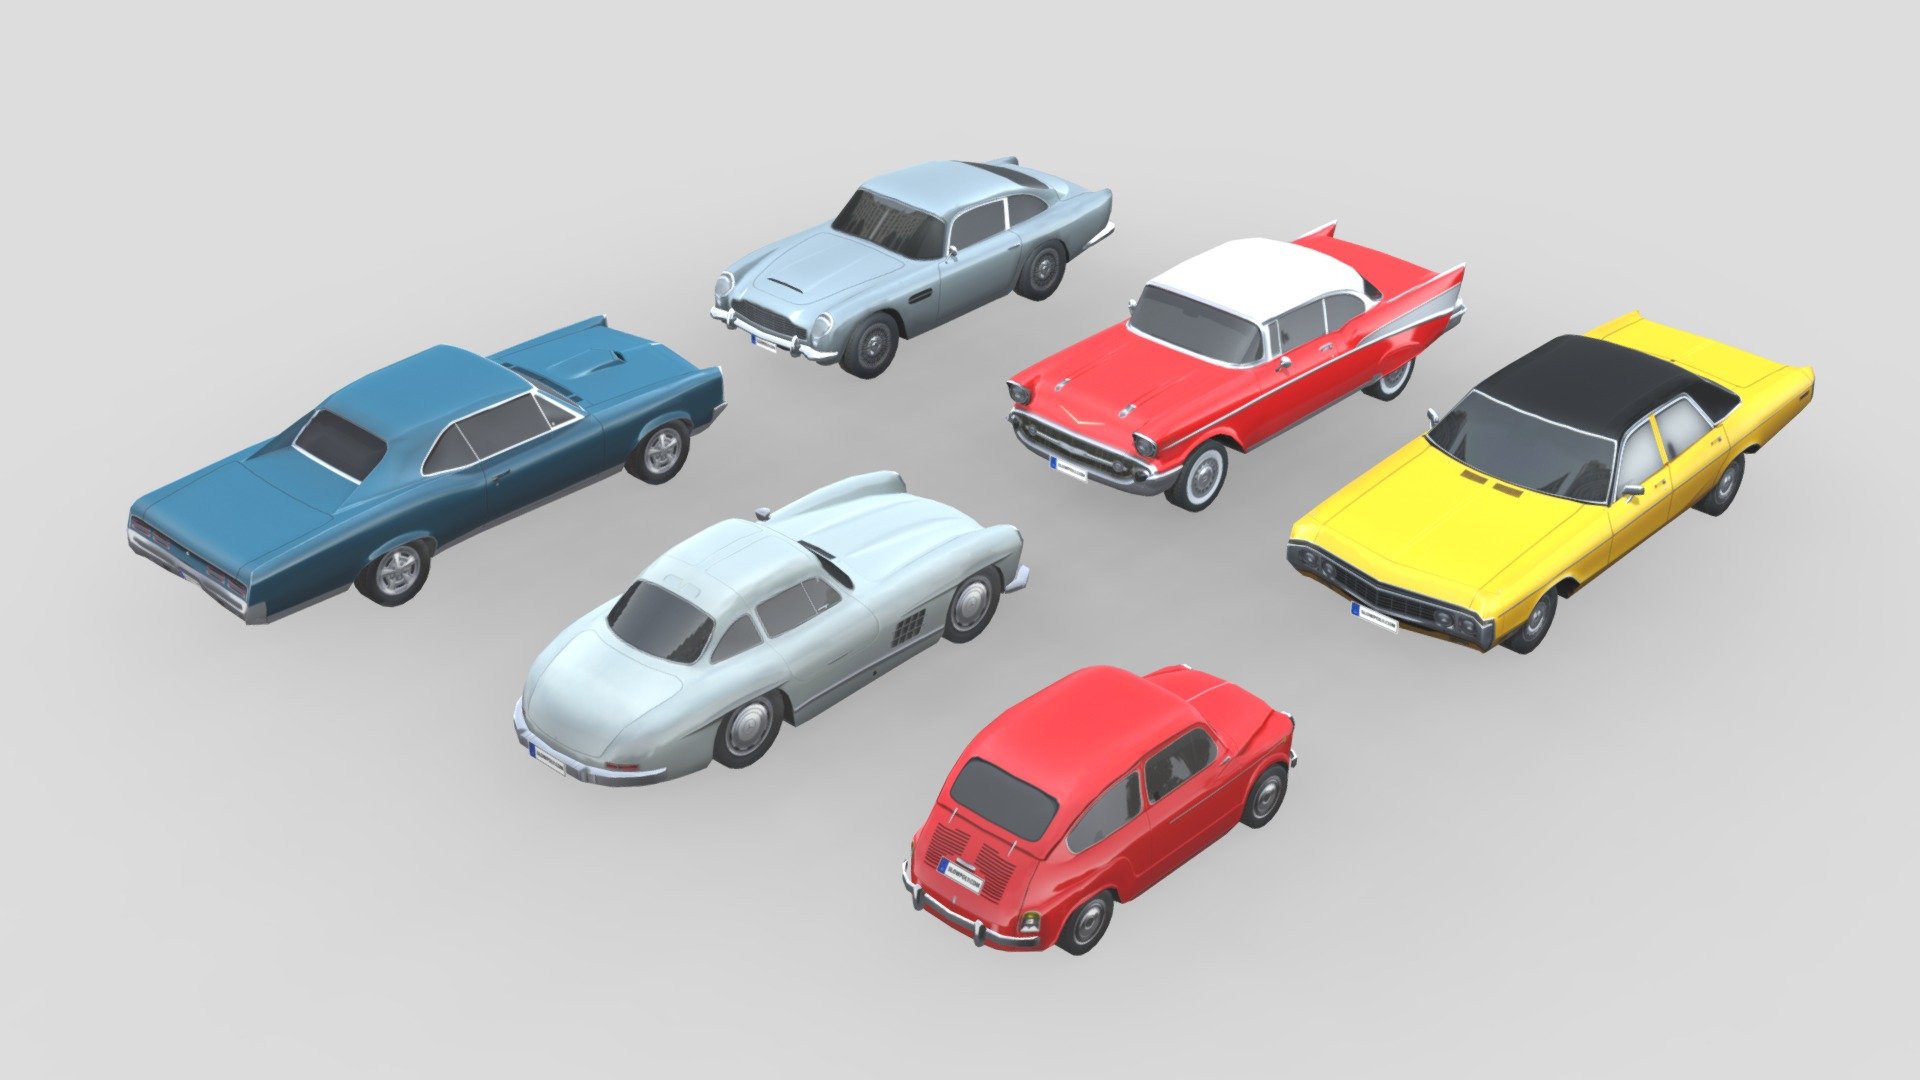 Our best low-poly car collection! Each car in this collection is carefully crafted, offering perfect topology and geometry. This ensures seamless integration into your projects.

With a low-poly concept, all cars deliver a visually stunning experience, complete with amazing details. This is made possible by pre-rendered textures that enhance realism optimally.

What’s included in this collection:
- Aston Martin DB5
- Chevrolet Bel Air 1957
- Dodge Polara 1970
- Fiat 600D 1965
- Mercedes-Benz 300SL Gullwing 1954
- Pontiac GTO 1967

By purchasing this collection, you will get high-quality low-poly assets, a perfect blend of quality and unbeatable affordability! - Low-Poly Car Pack 002 - Timeless Classics - Buy Royalty Free 3D model by slowpoly 3d model